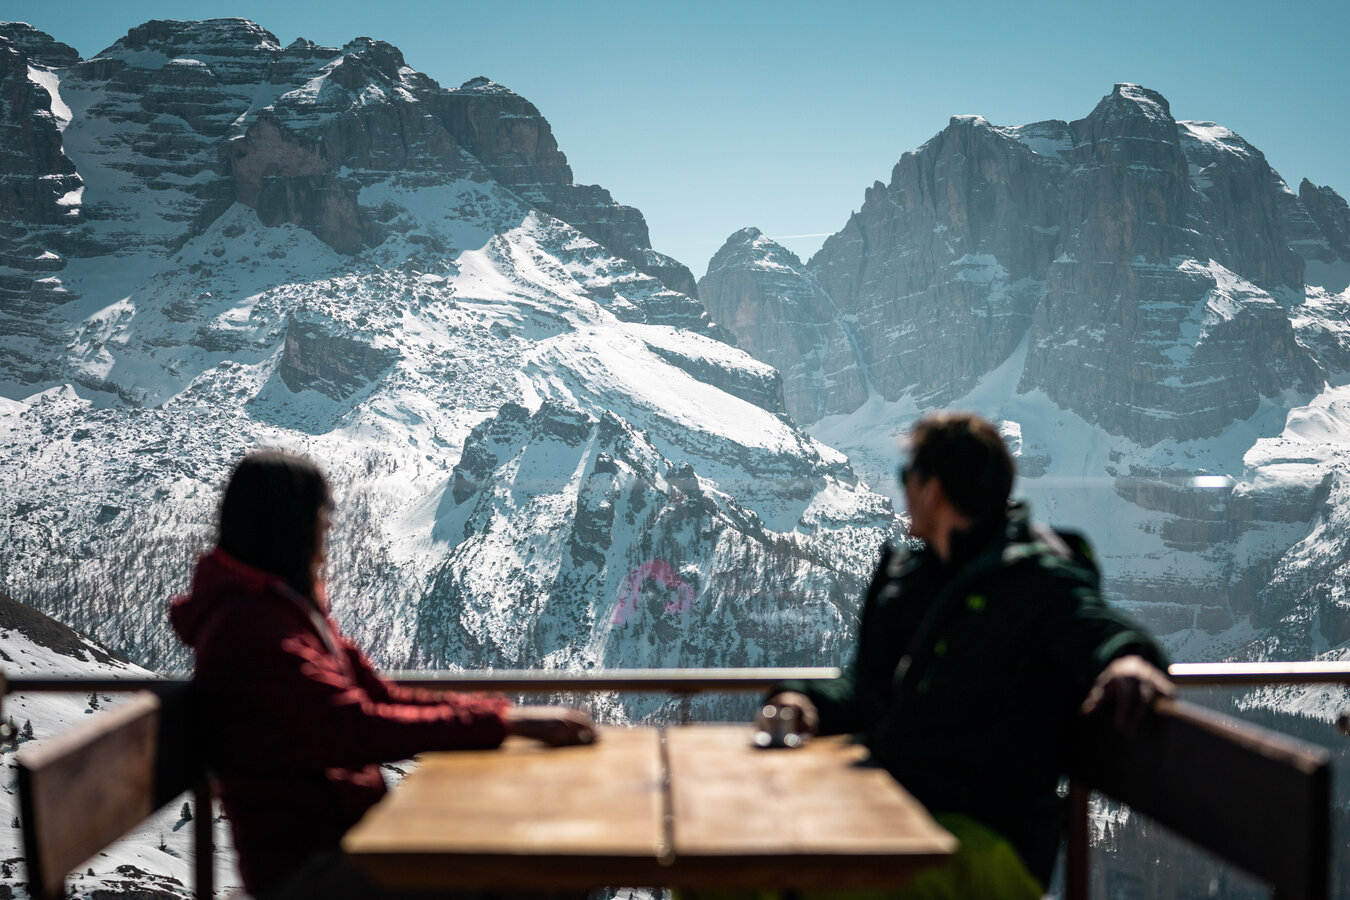 Mountain Huts, Restaurants, And Après Ski On The Slopes